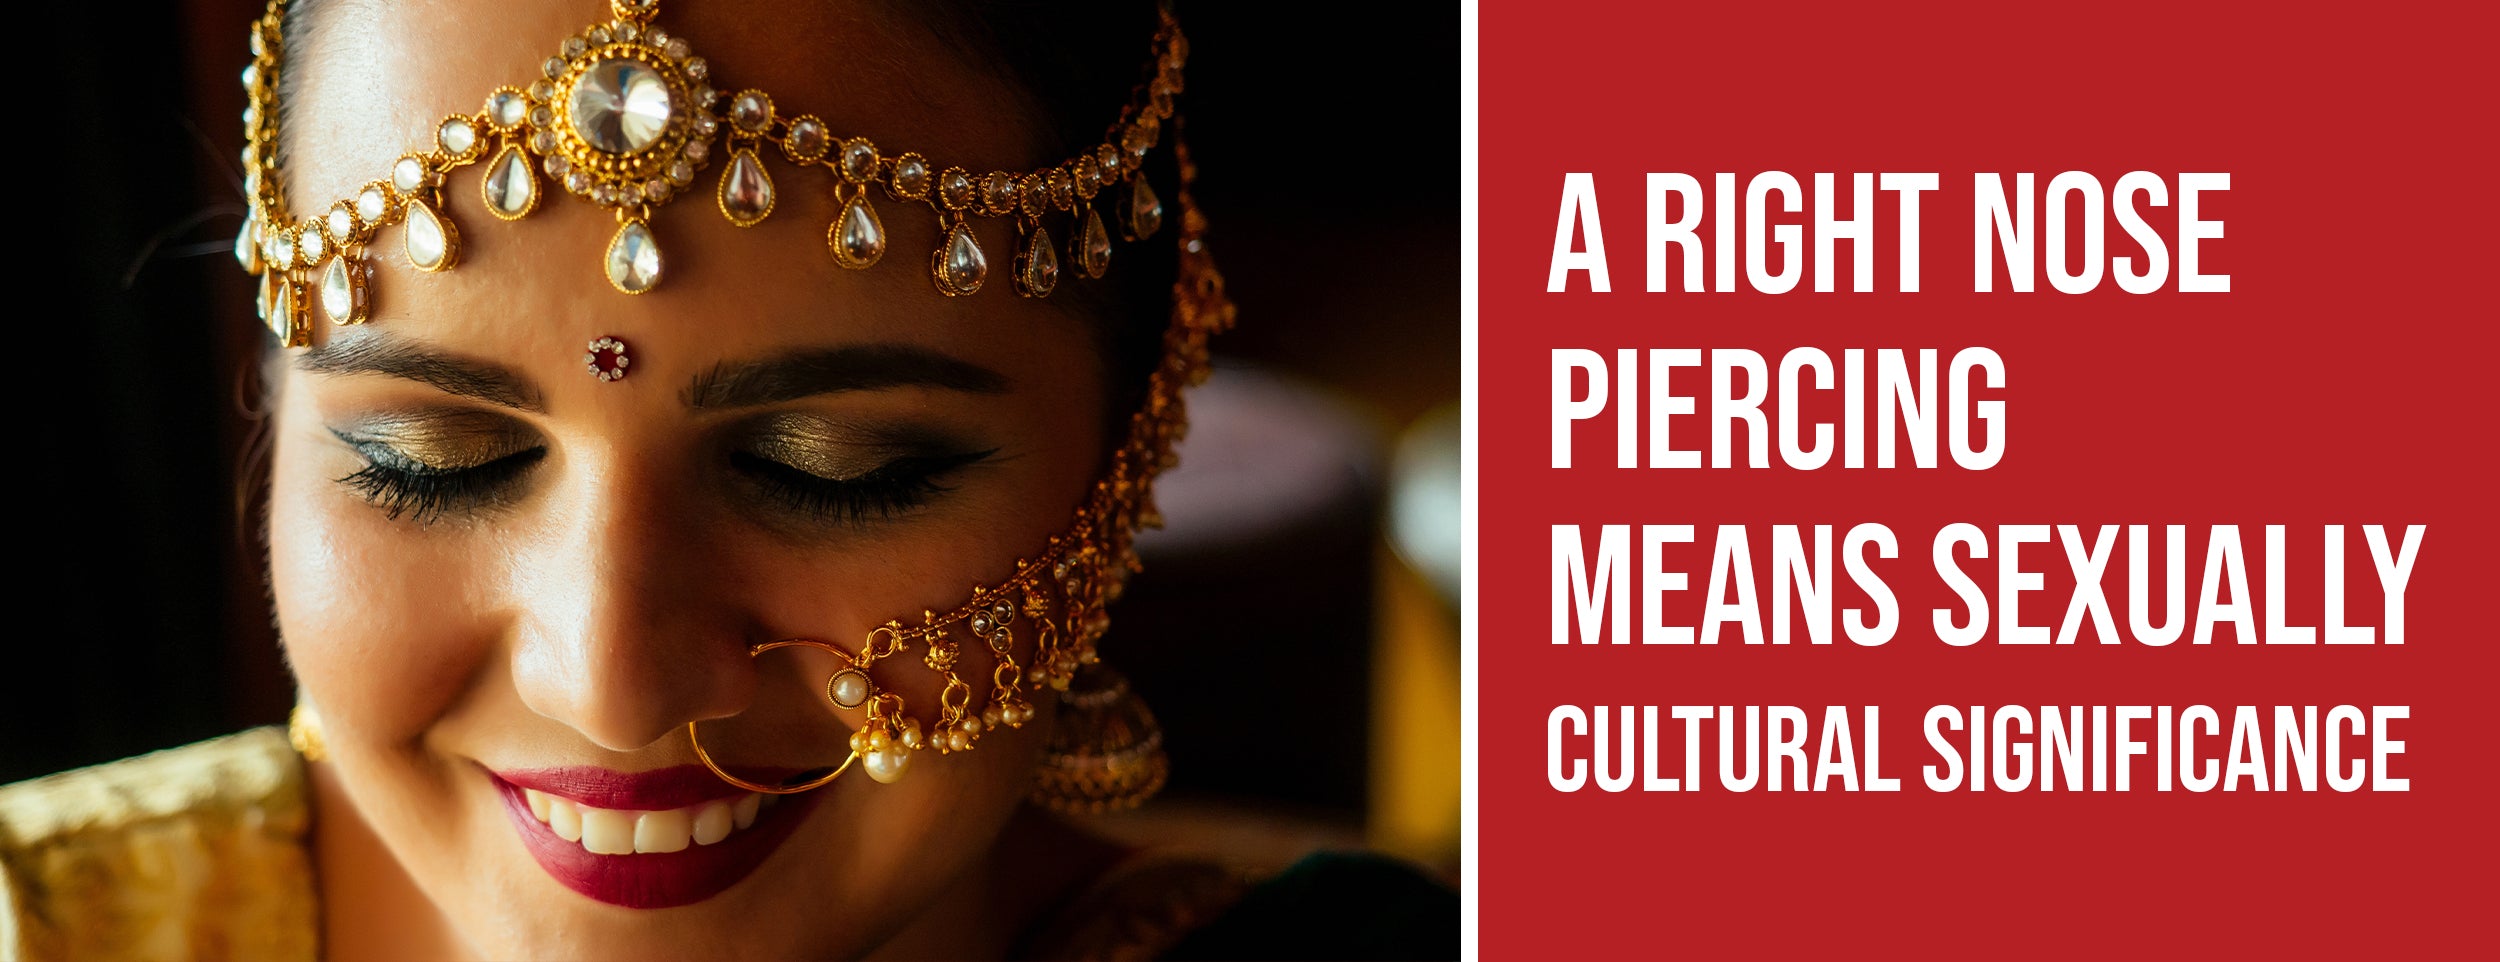 Cultural Significance of Right Nose Piercings